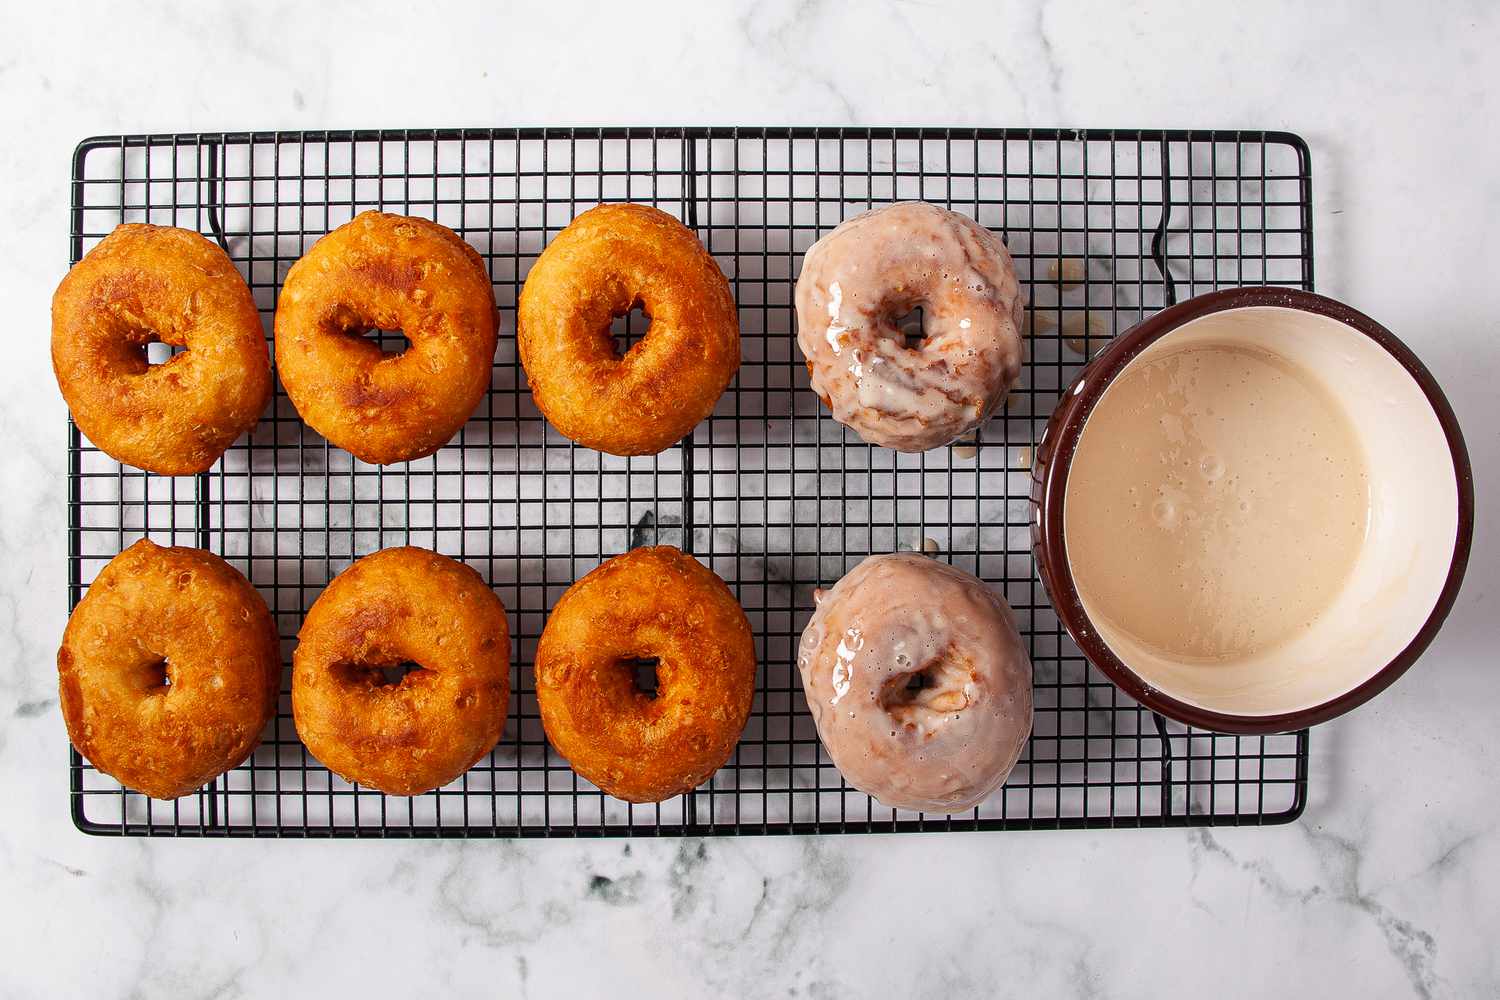 Doughnuts dipped in maple glaze on a cooling rack